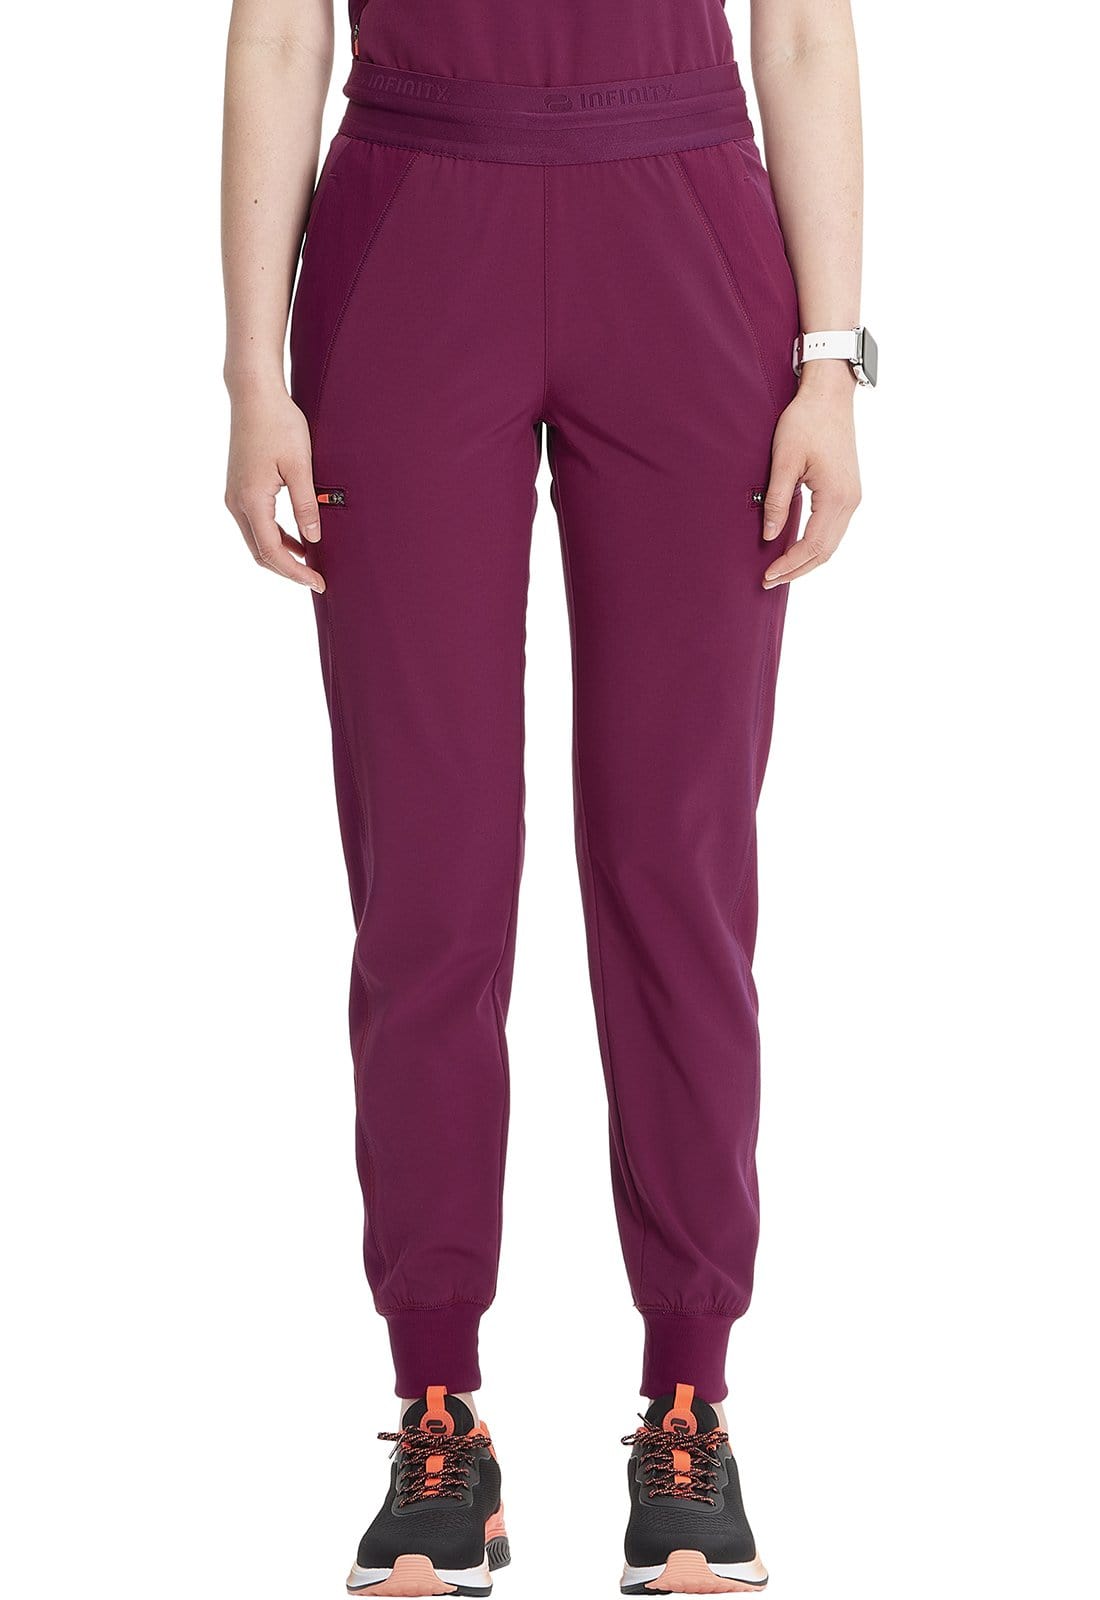 Infinity Infinity GNR8 Wine / 3XL Infinity GNR8  Pull-on Jogger IN122A